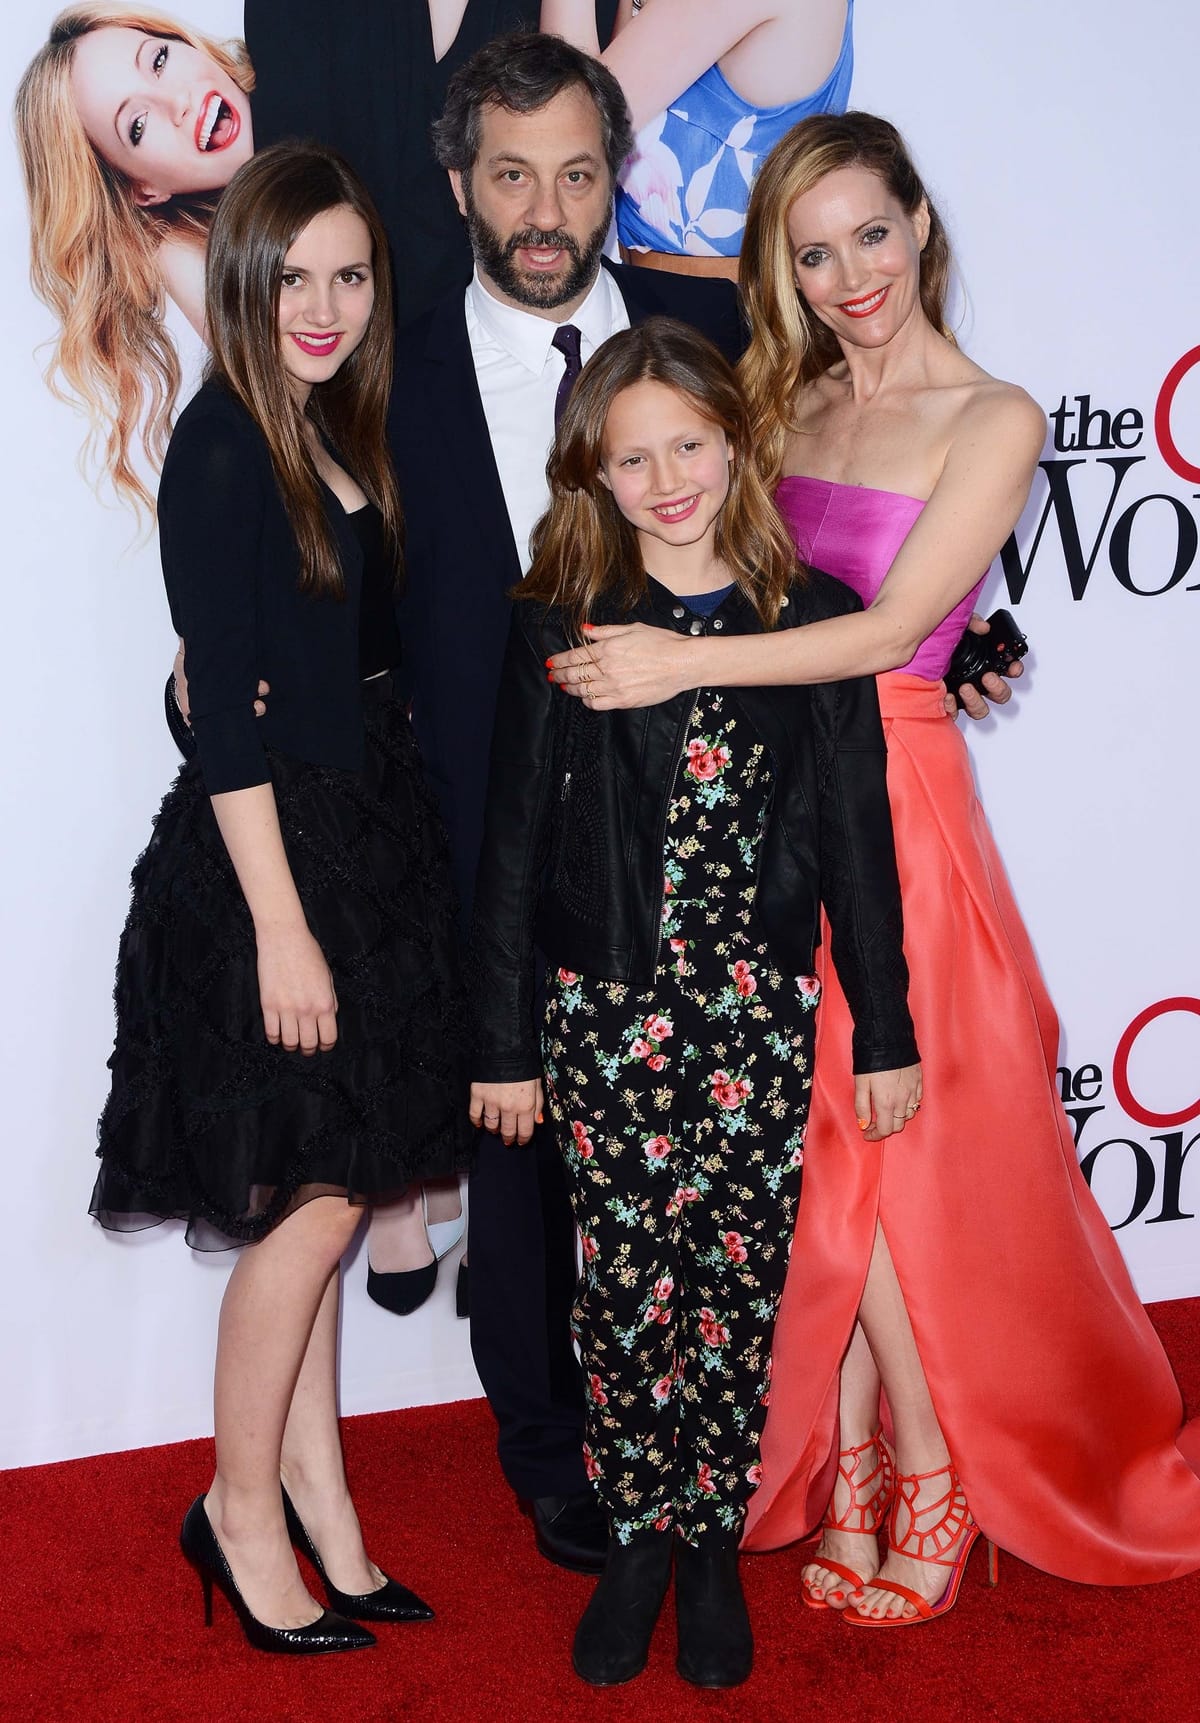 Actress Leslie Mann, film producer Judd Apatow, and their daughters Iris Apatow and Maude Annabelle Apatow